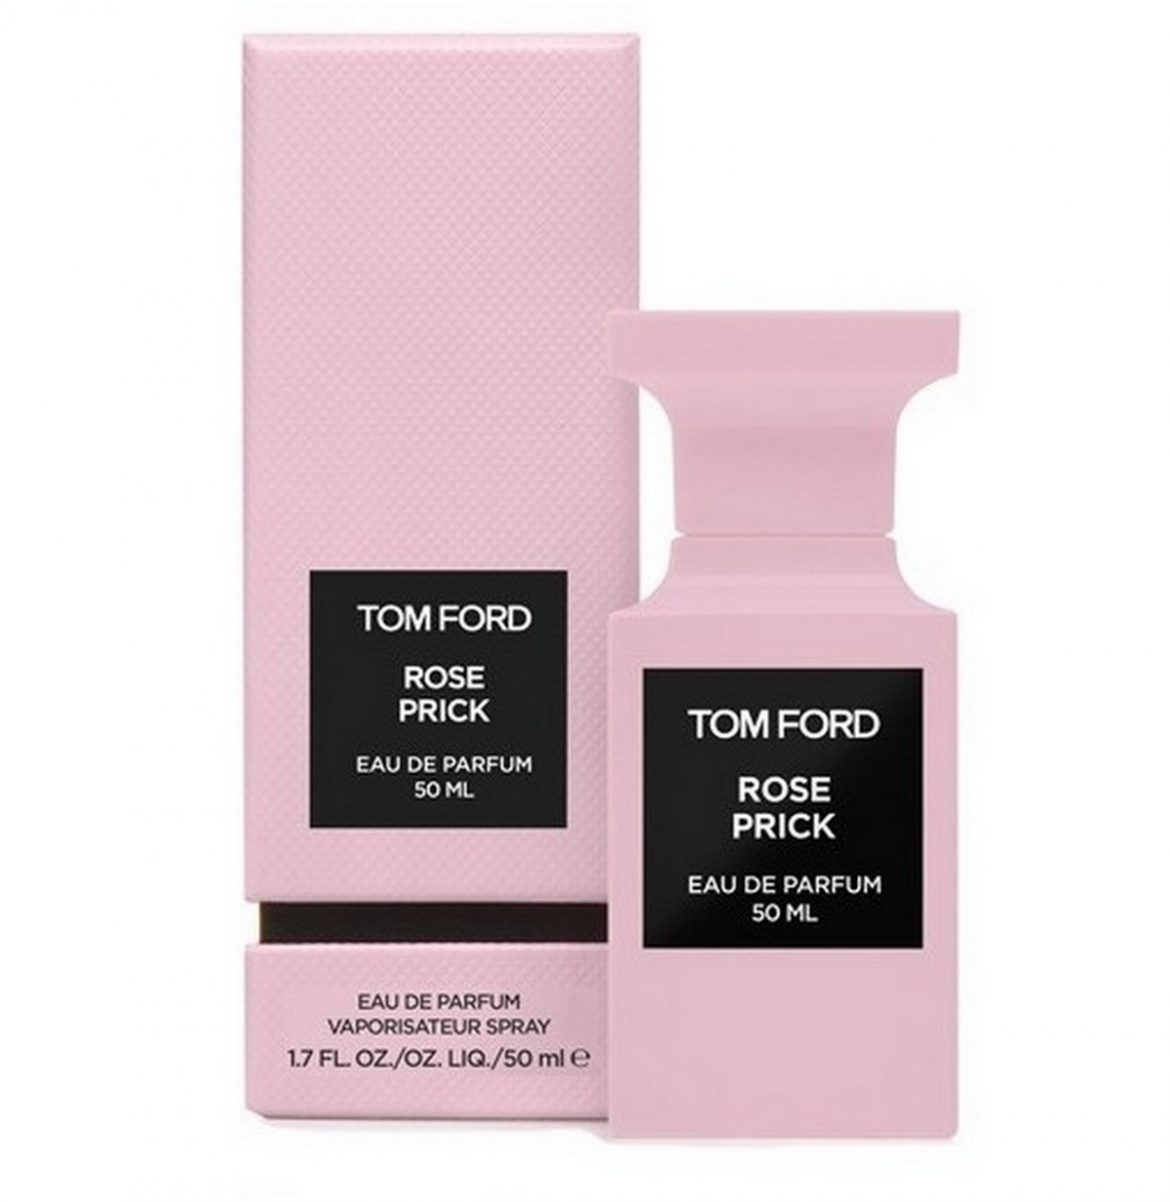 Rose Prick unisex perfume by Tom Ford is here to appease your senses